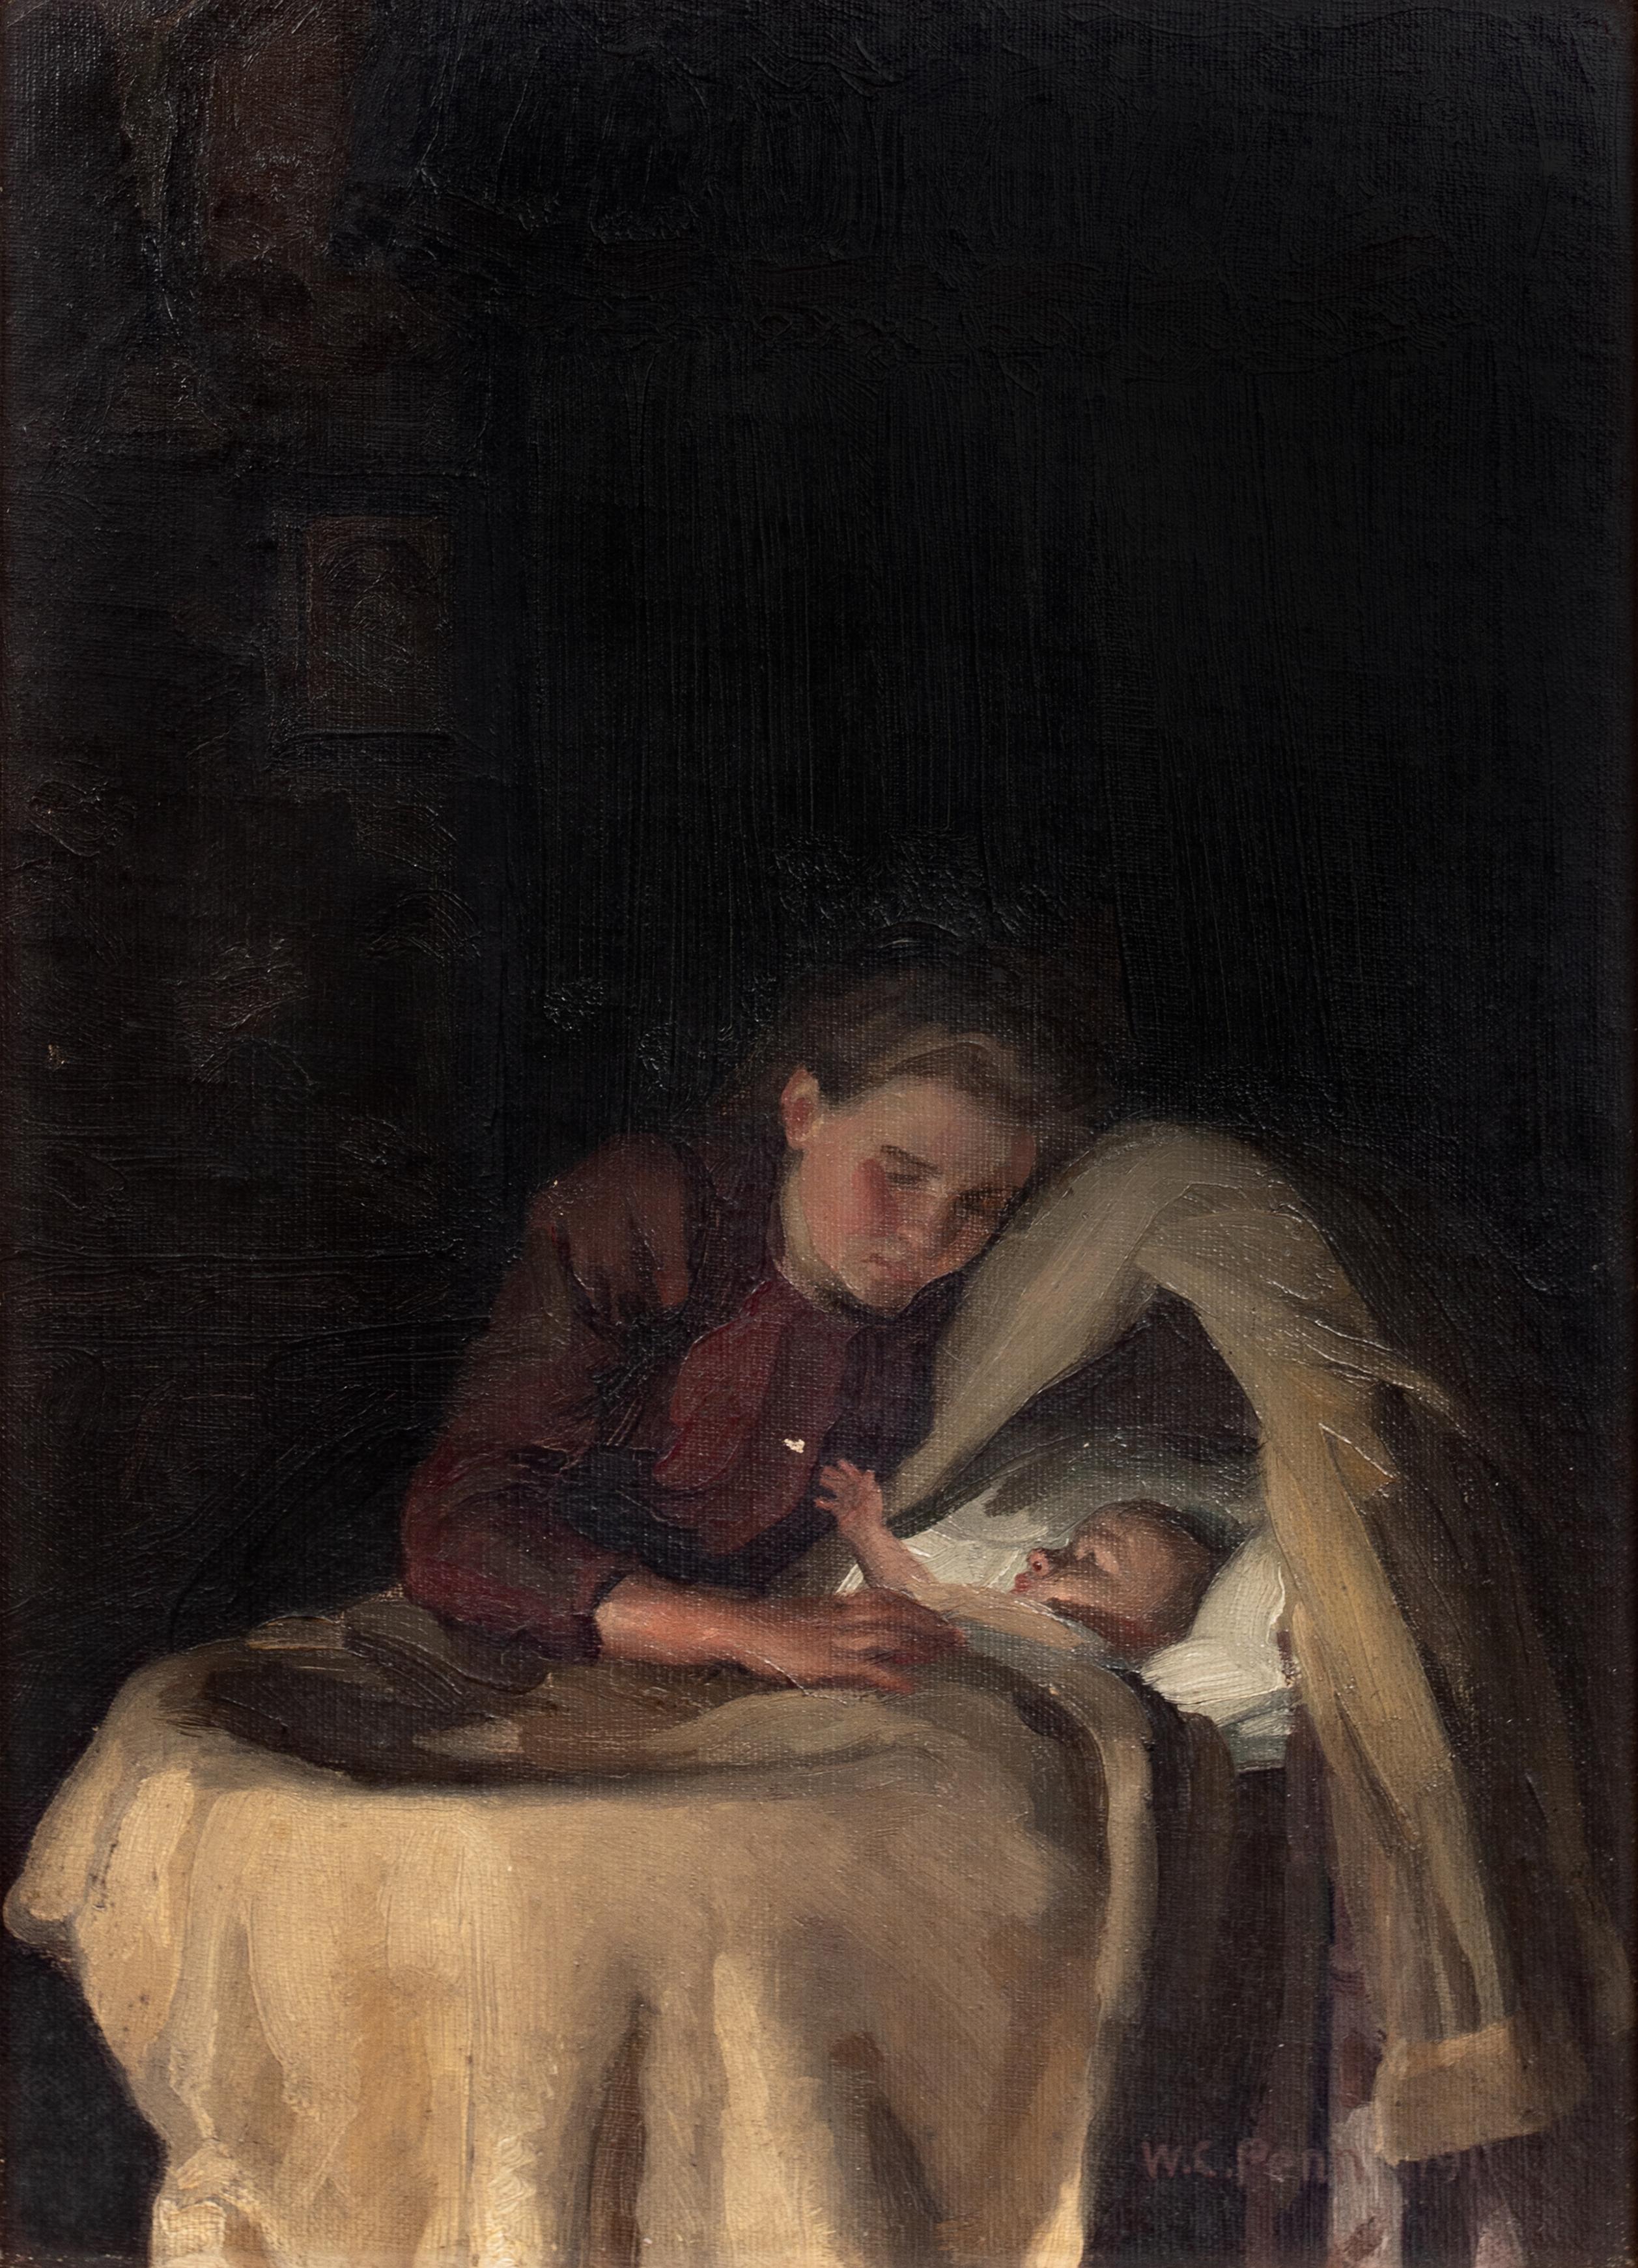 Mother & Baby, dated 1911

by WILLIAM CHARLES PENN (1877-1968)

1911 interior portrait of a mother and her baby, oil on board by William Charles Penn. Intimate interior study of a candlelit scene with a mother and her baby. Superb example of the